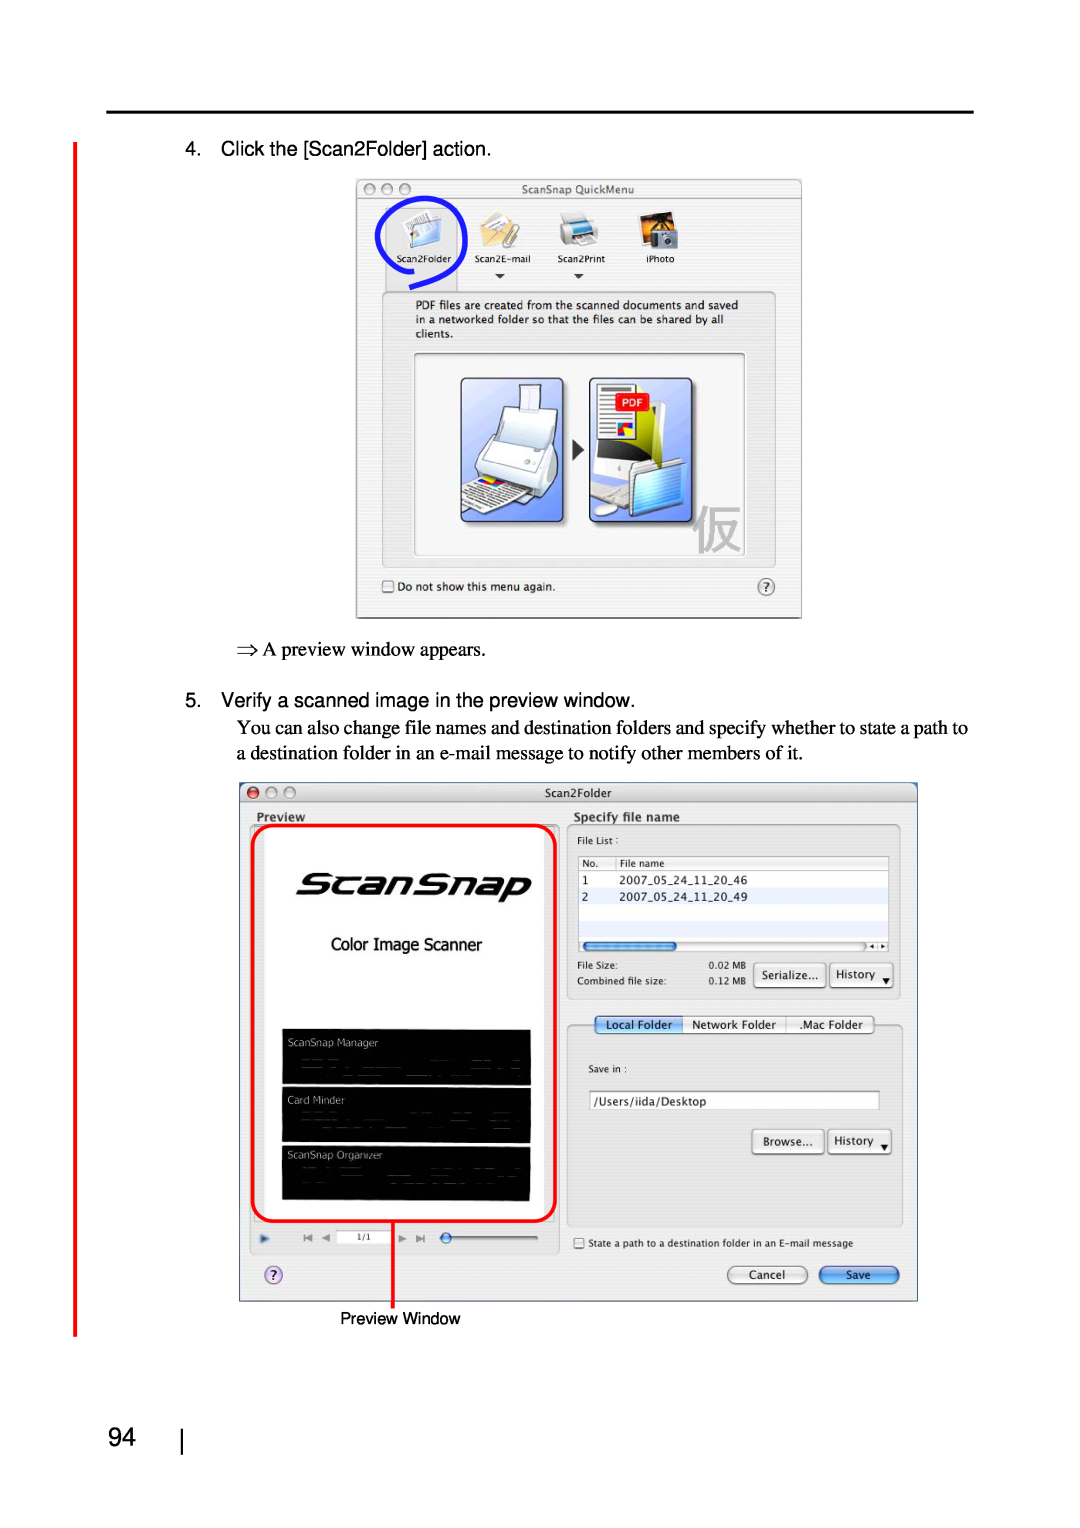 Fujitsu S510M manual Click the Scan2Folder action, ⇒ A preview window appears, Verify a scanned image in the preview window 